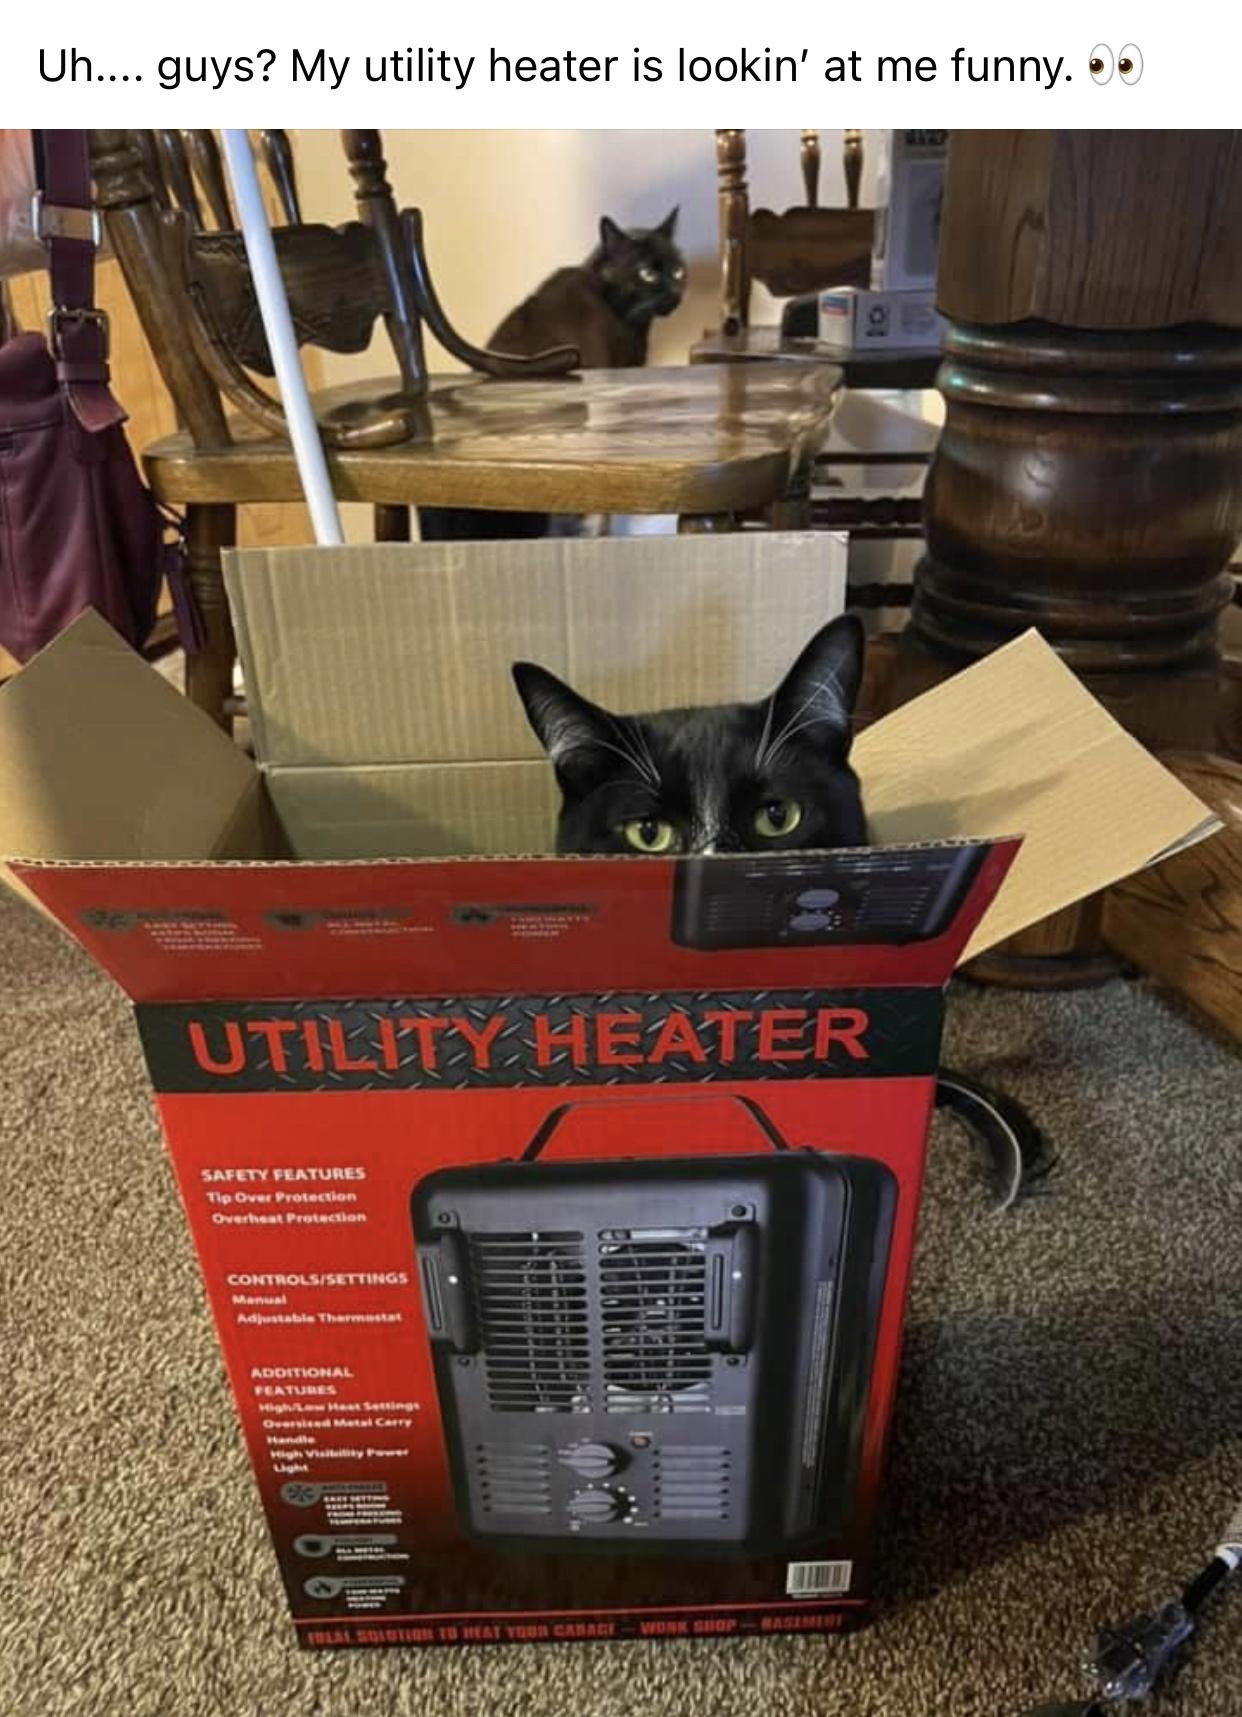 cat - Uh.... guys? My utility heater is lookin' at me funny. Utility Heater Safety Features Tip Over Protection Overheat Protection Controlsisettings Manual Adjustable Thermostat Additional Features Her Settings Oversked Metal Carry Light Sistem Tu Hat Yo